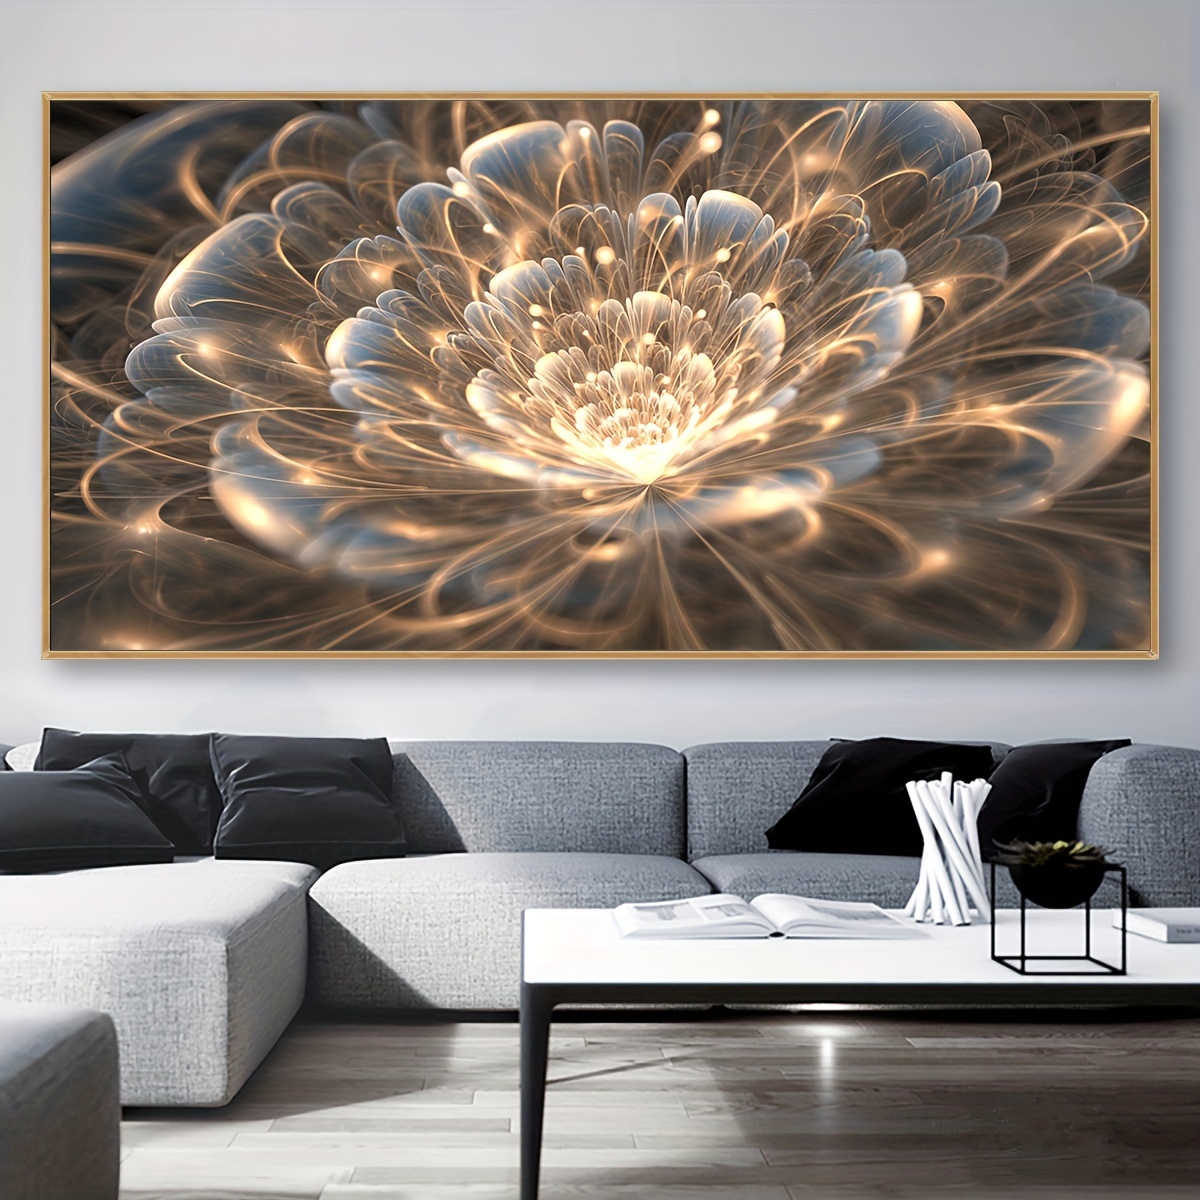 

1pc Unframed Canvas Poster, Modern Art, Cool Lotus Wall Art, Ideal Gift For Bedroom Living Room Corridor, Wall Art, Wall Decor, Winter Decor, Room Decoration